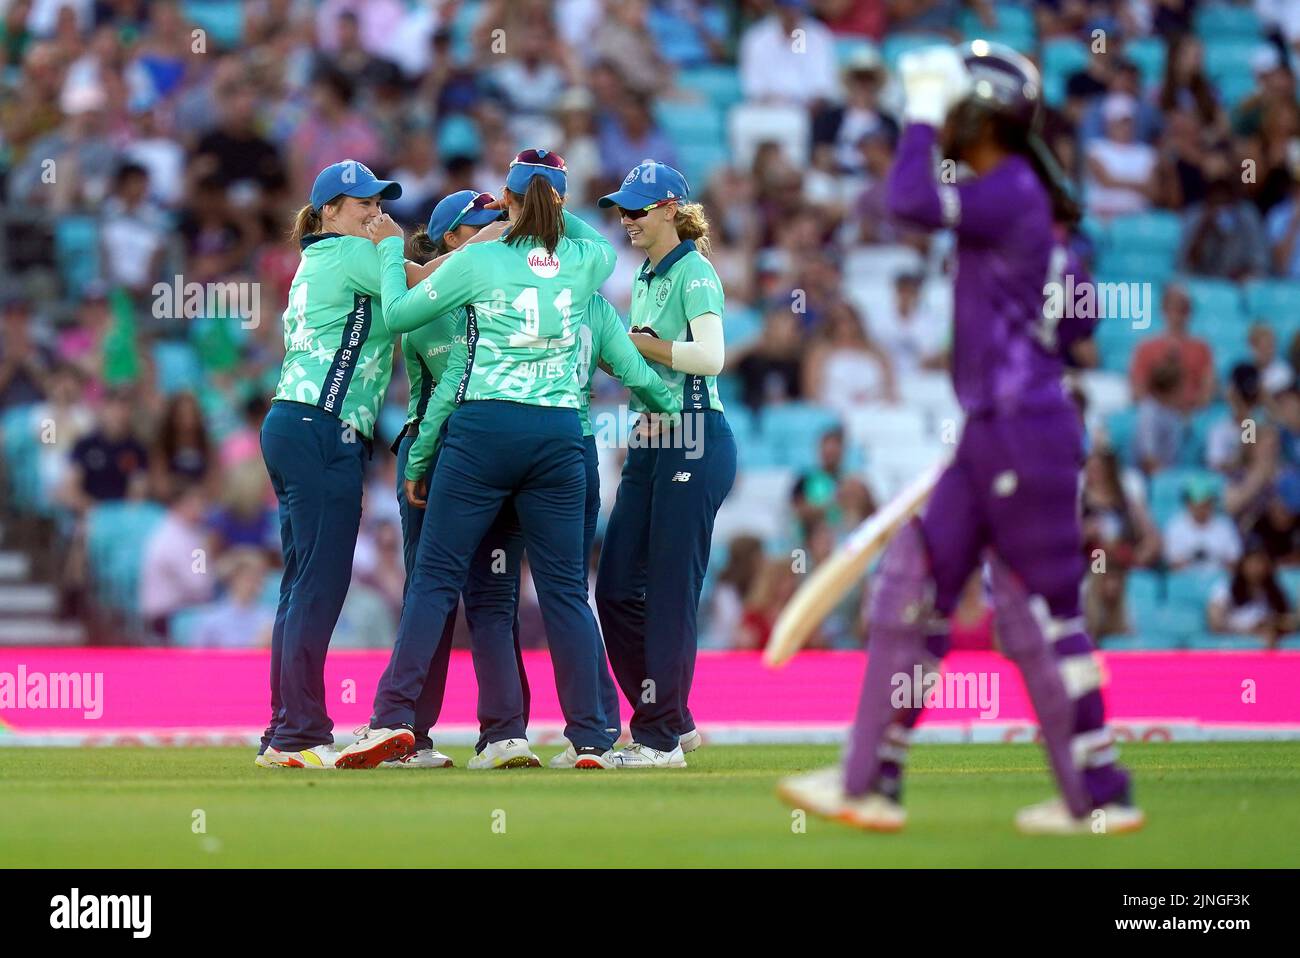 Oval Invincibles players celebrate taking the wicket of Northern Superchargers Jemimah Rodrigues during The Hundred match at The Kia Oval, London. Picture date: Thursday August 11, 2022. Stock Photo